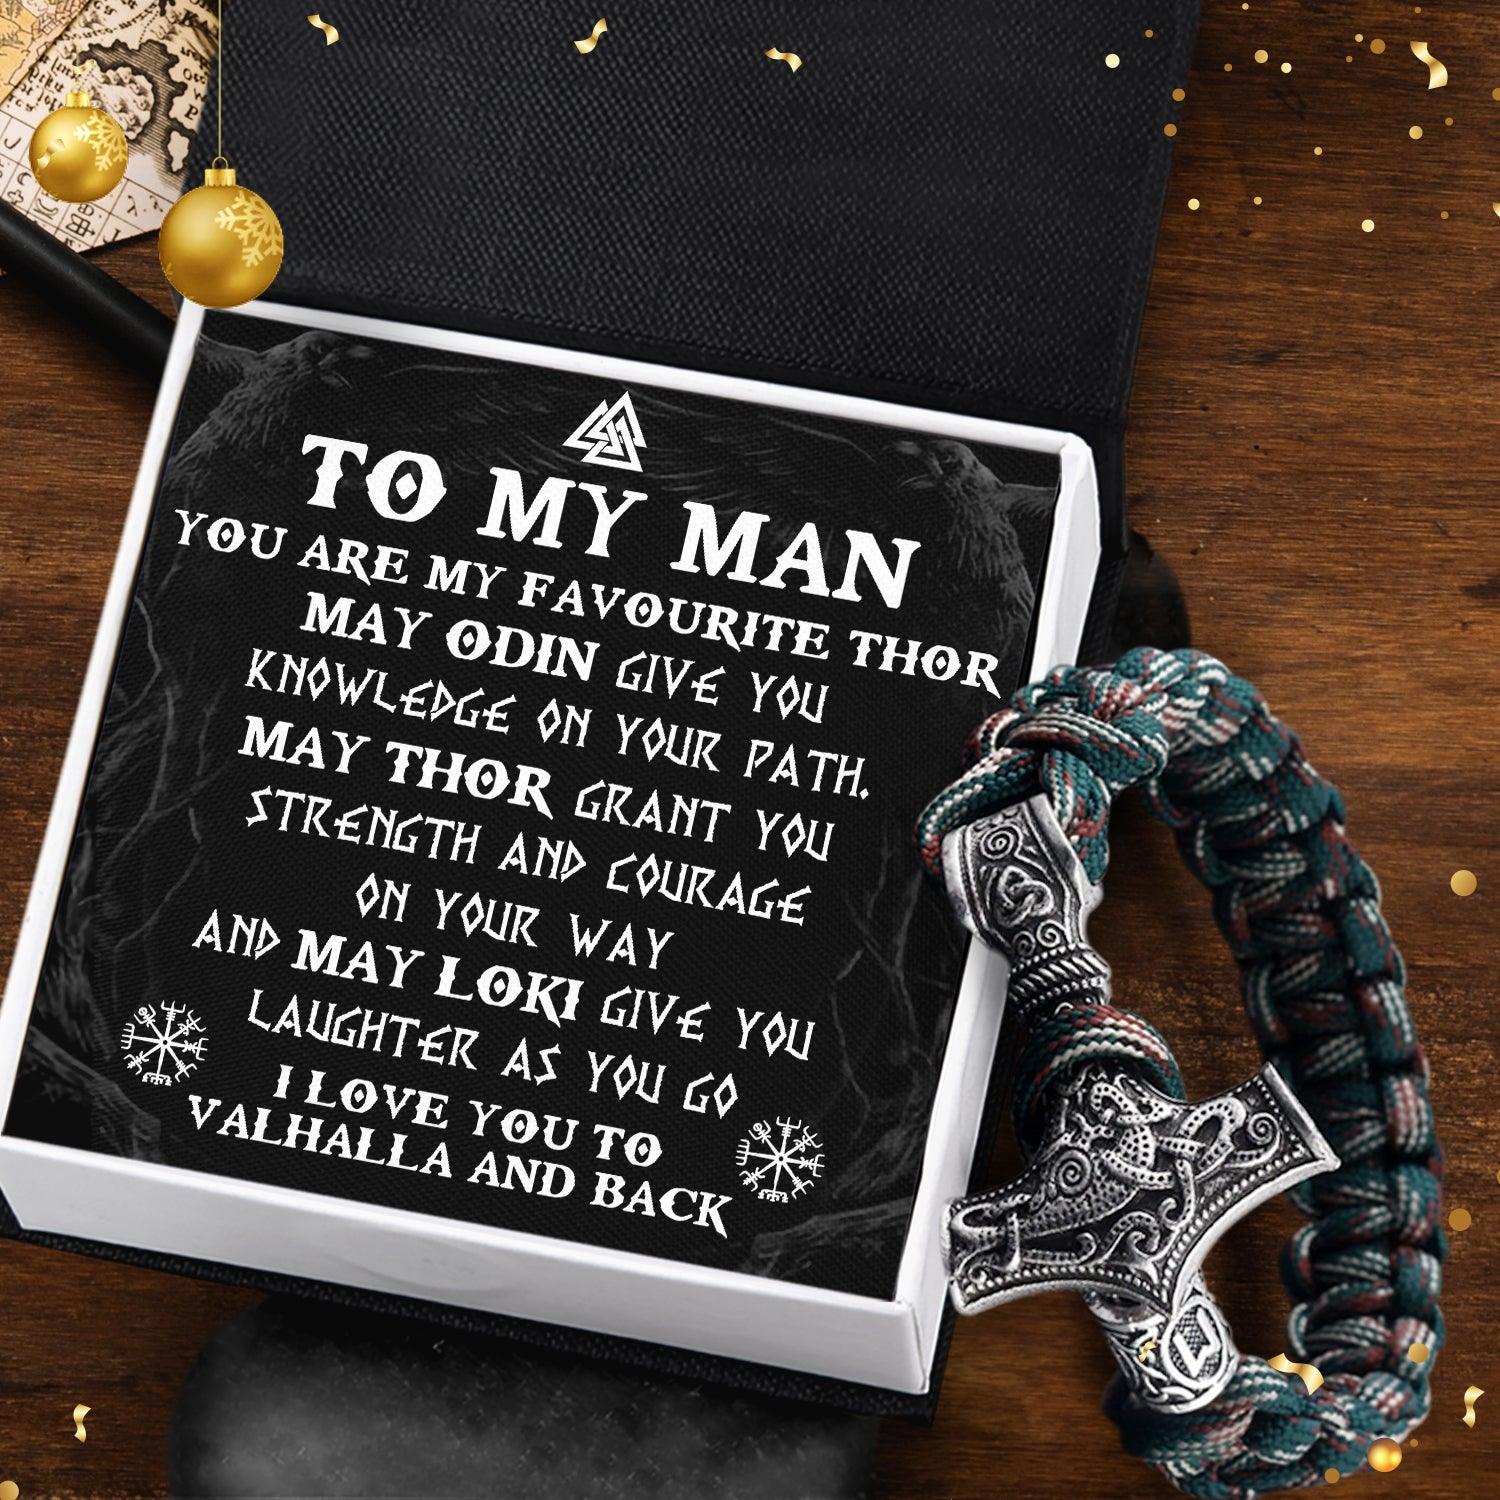 Viking Thor's Hammer Bracelet - Viking - To My Man - I Love You To Valhalla And Back - Augbo26001 - Gifts Holder